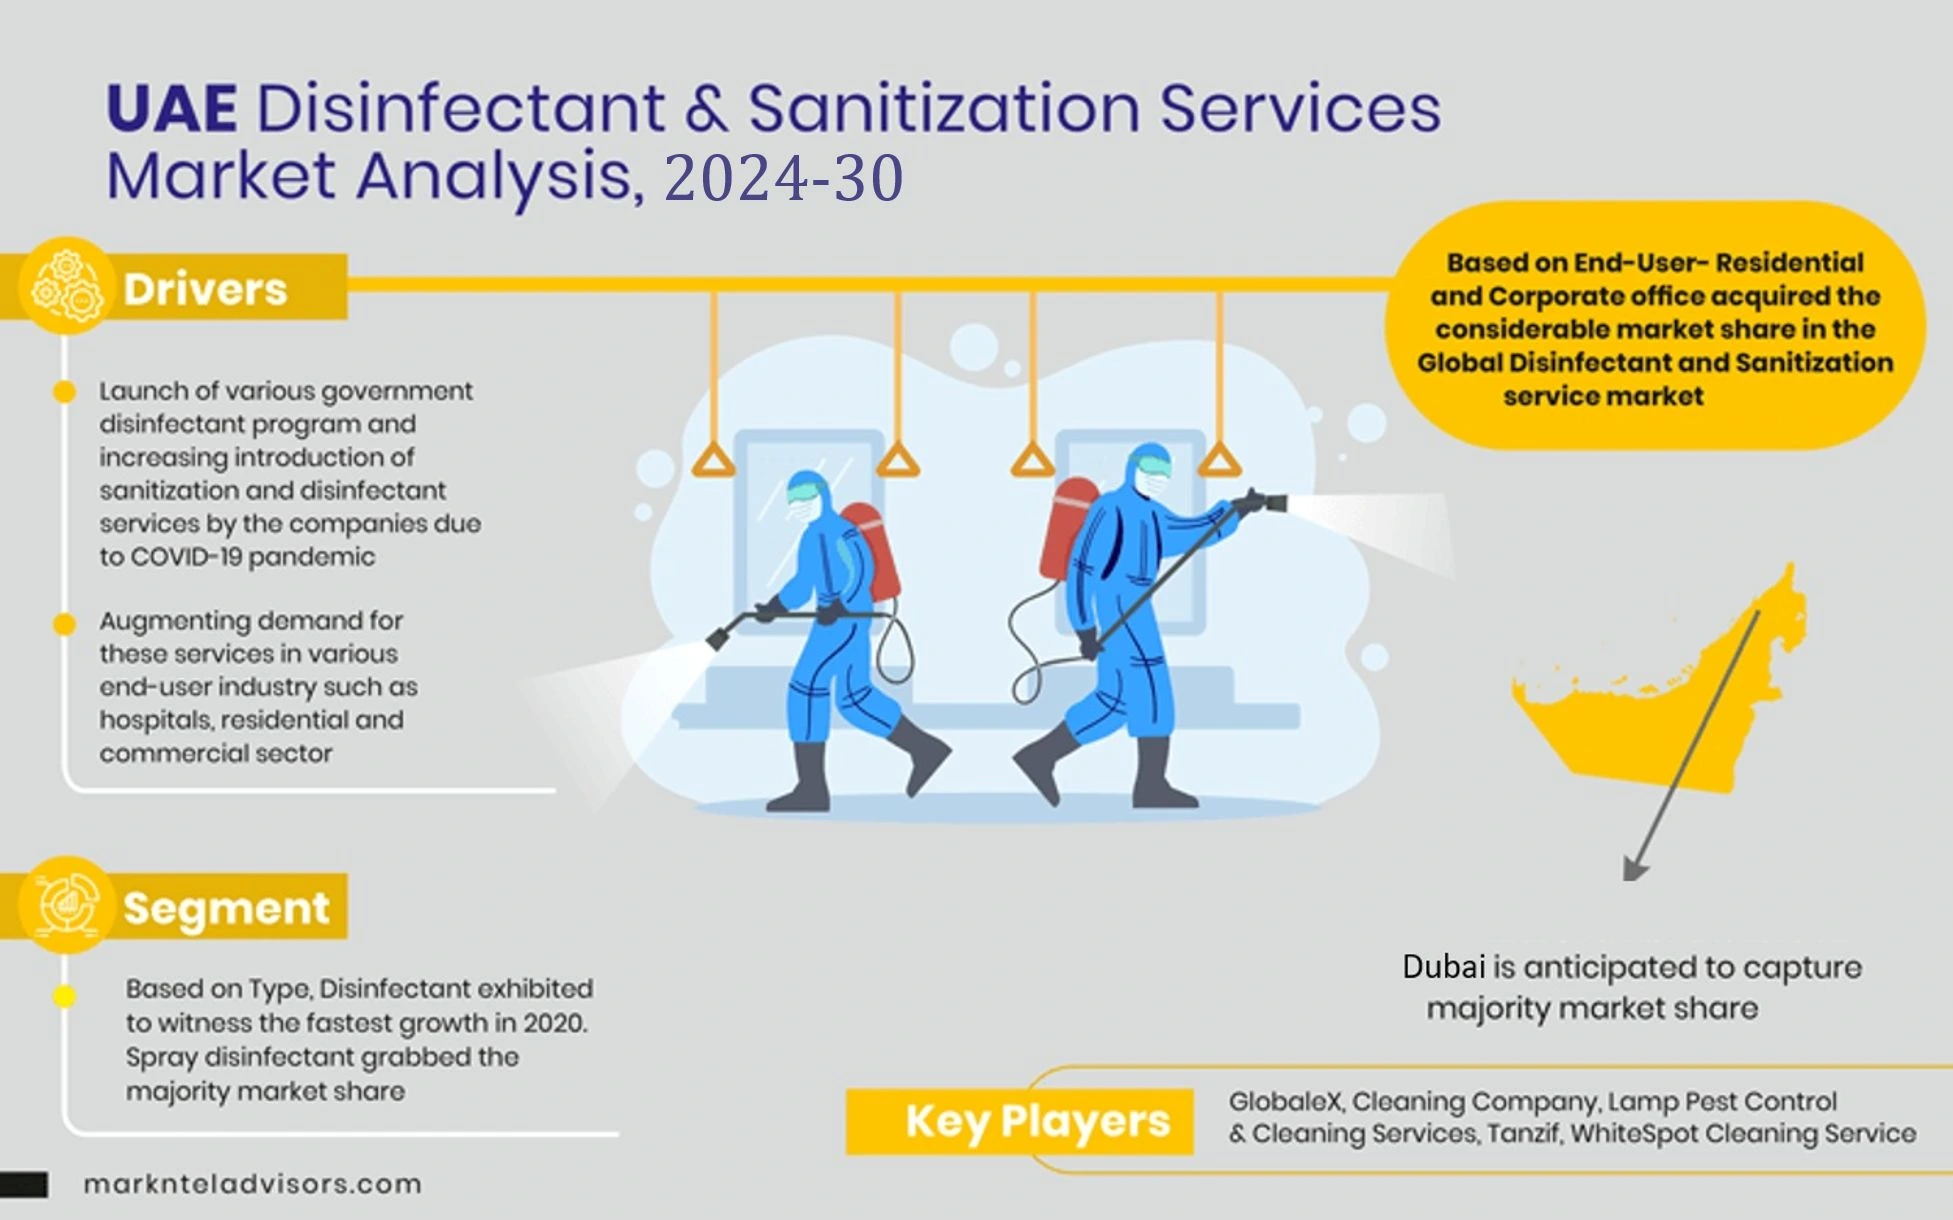 UAE Disinfectant & Sanitization Services Market: 5 Key Factors – Industry Segment, Top Companies, Geographical Reach, Opportunities, and Challenges